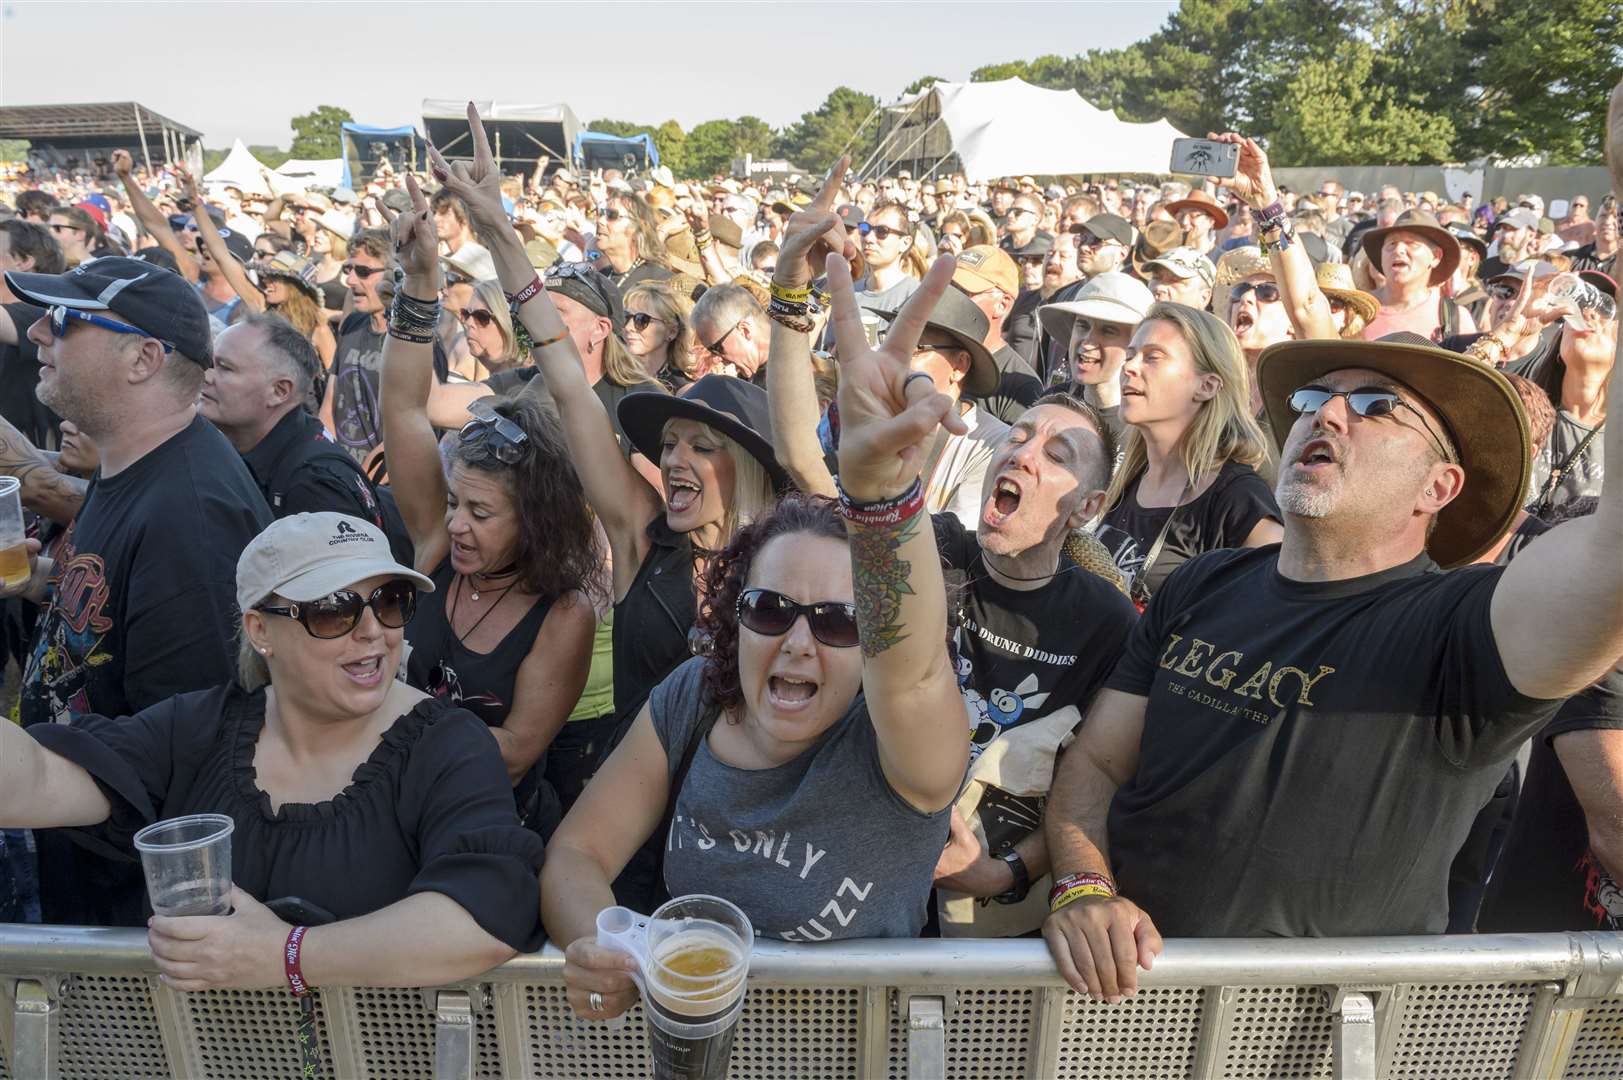 The promoters of Ramblin' Man have vowed to ensure it returns for 2023